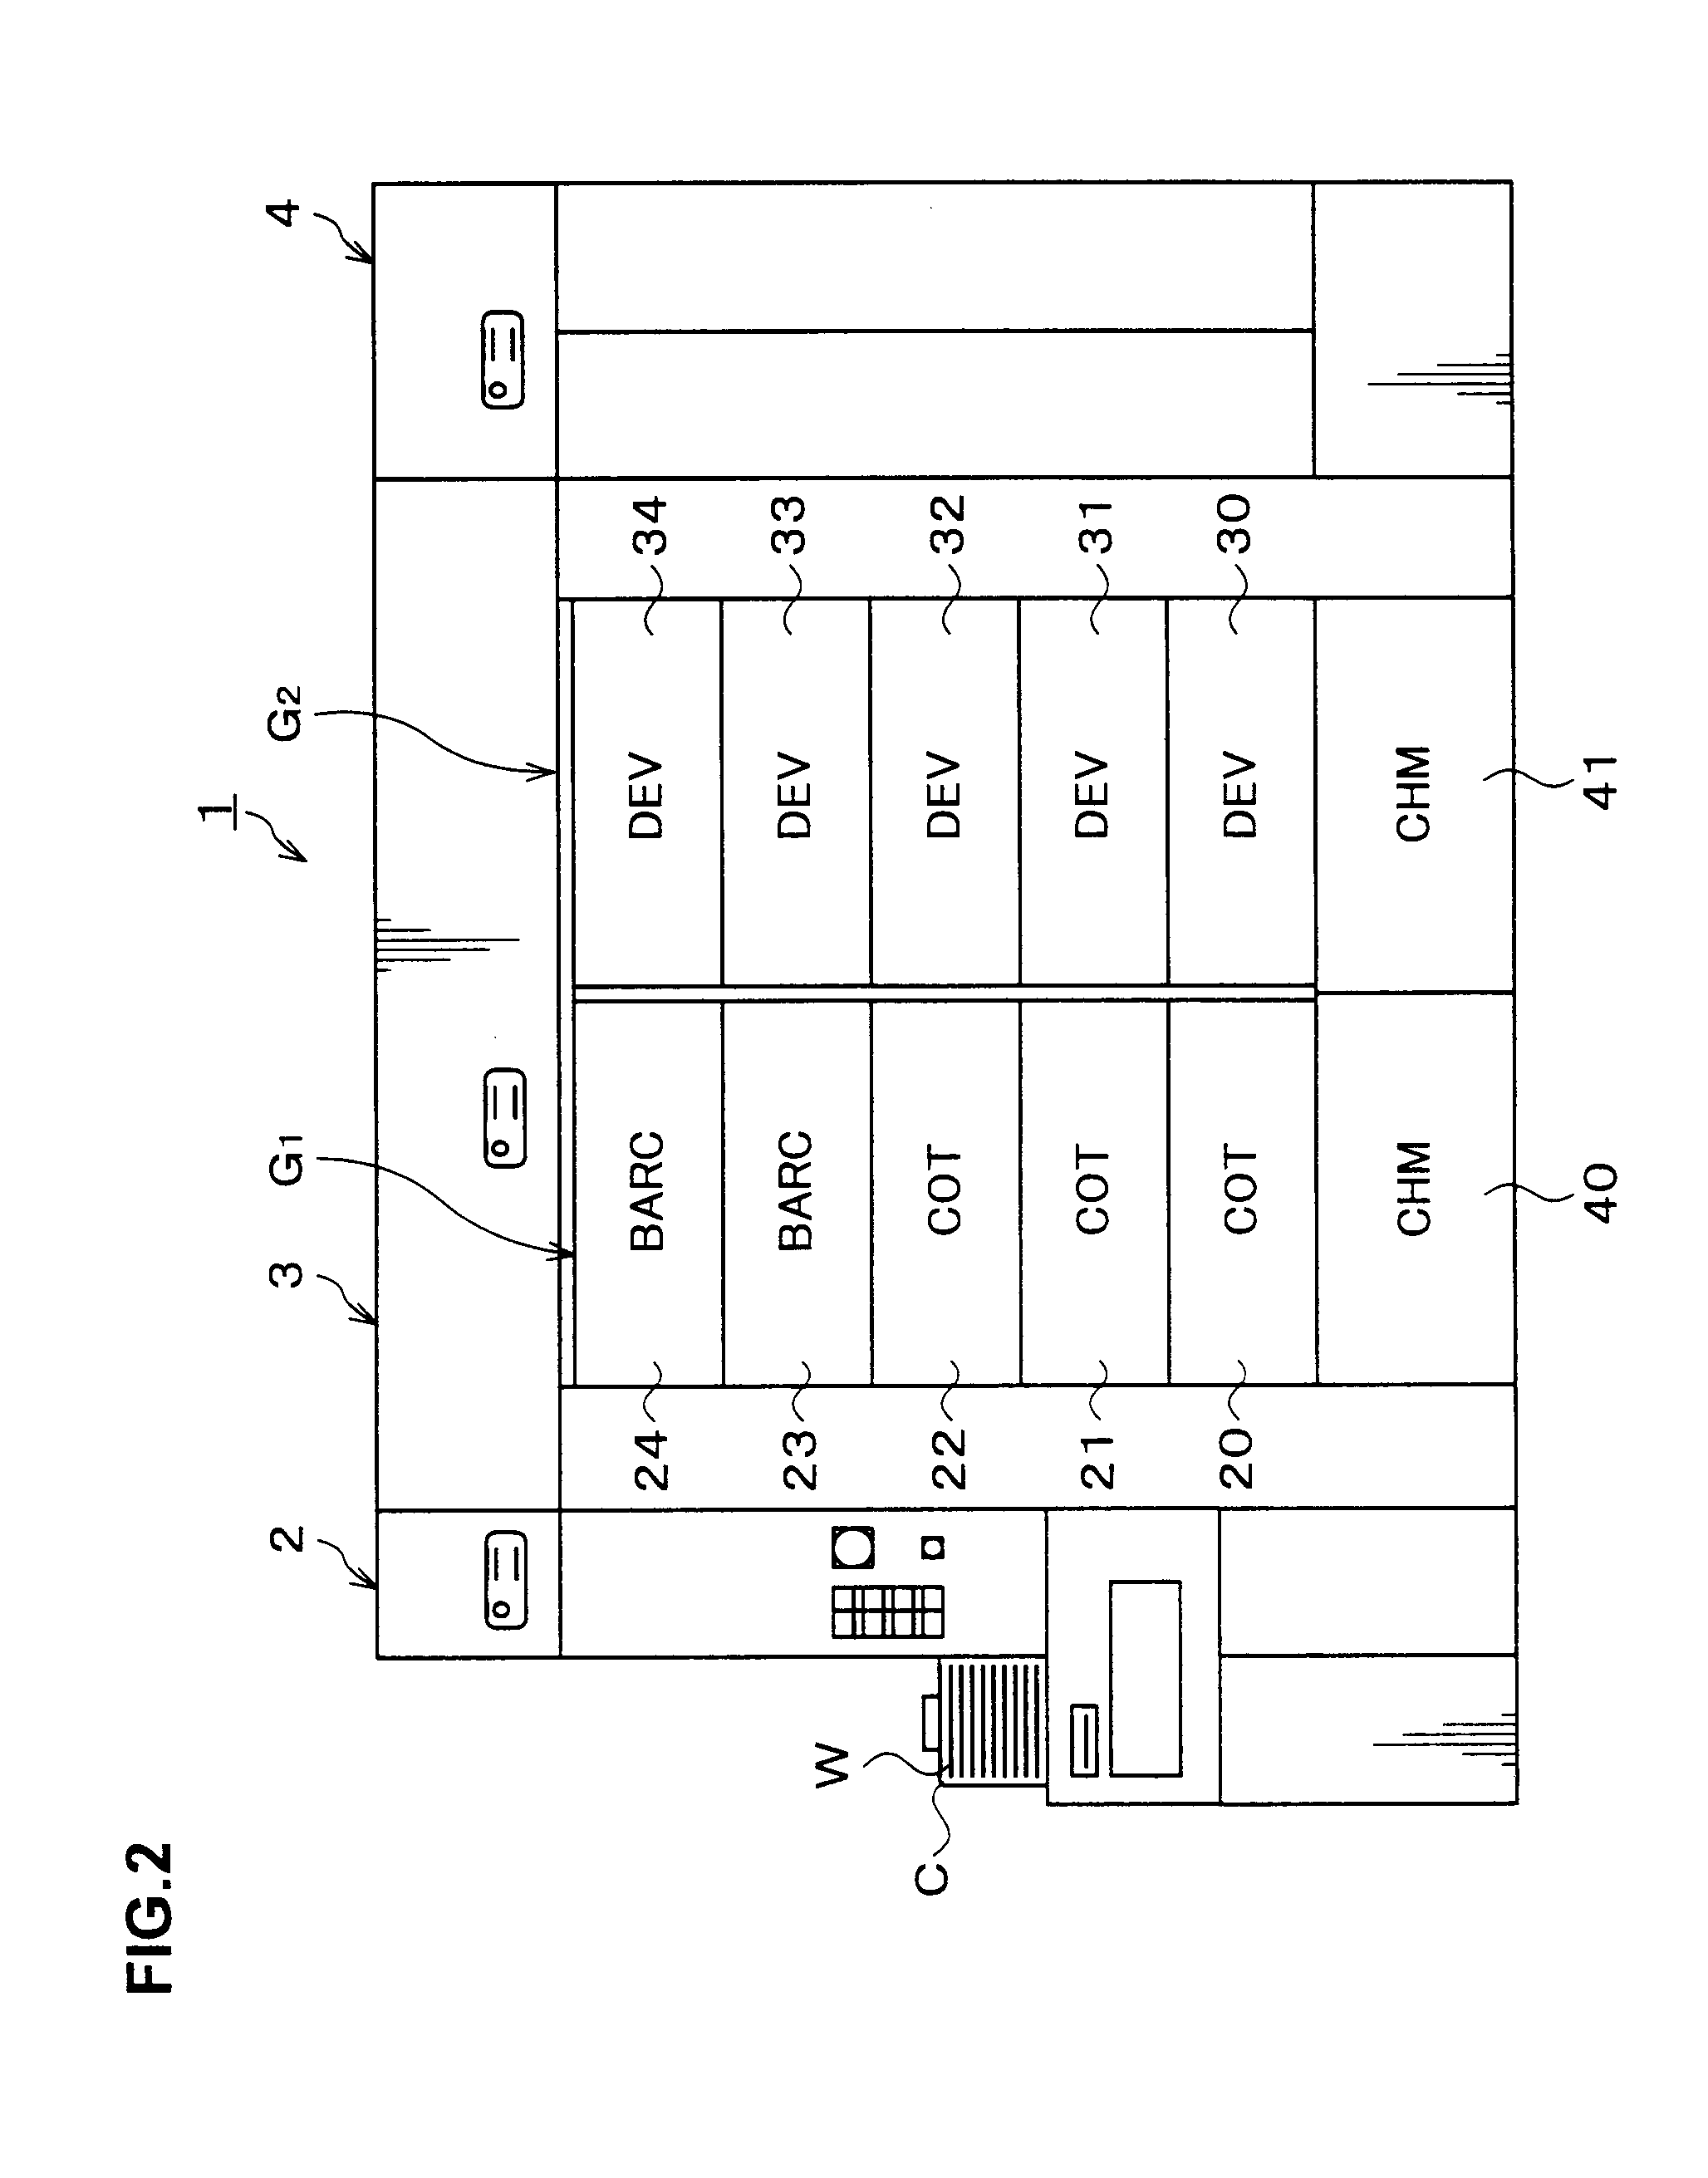 Substrate processing method, substrate processing system, and computer-readable recording medium recording program thereon